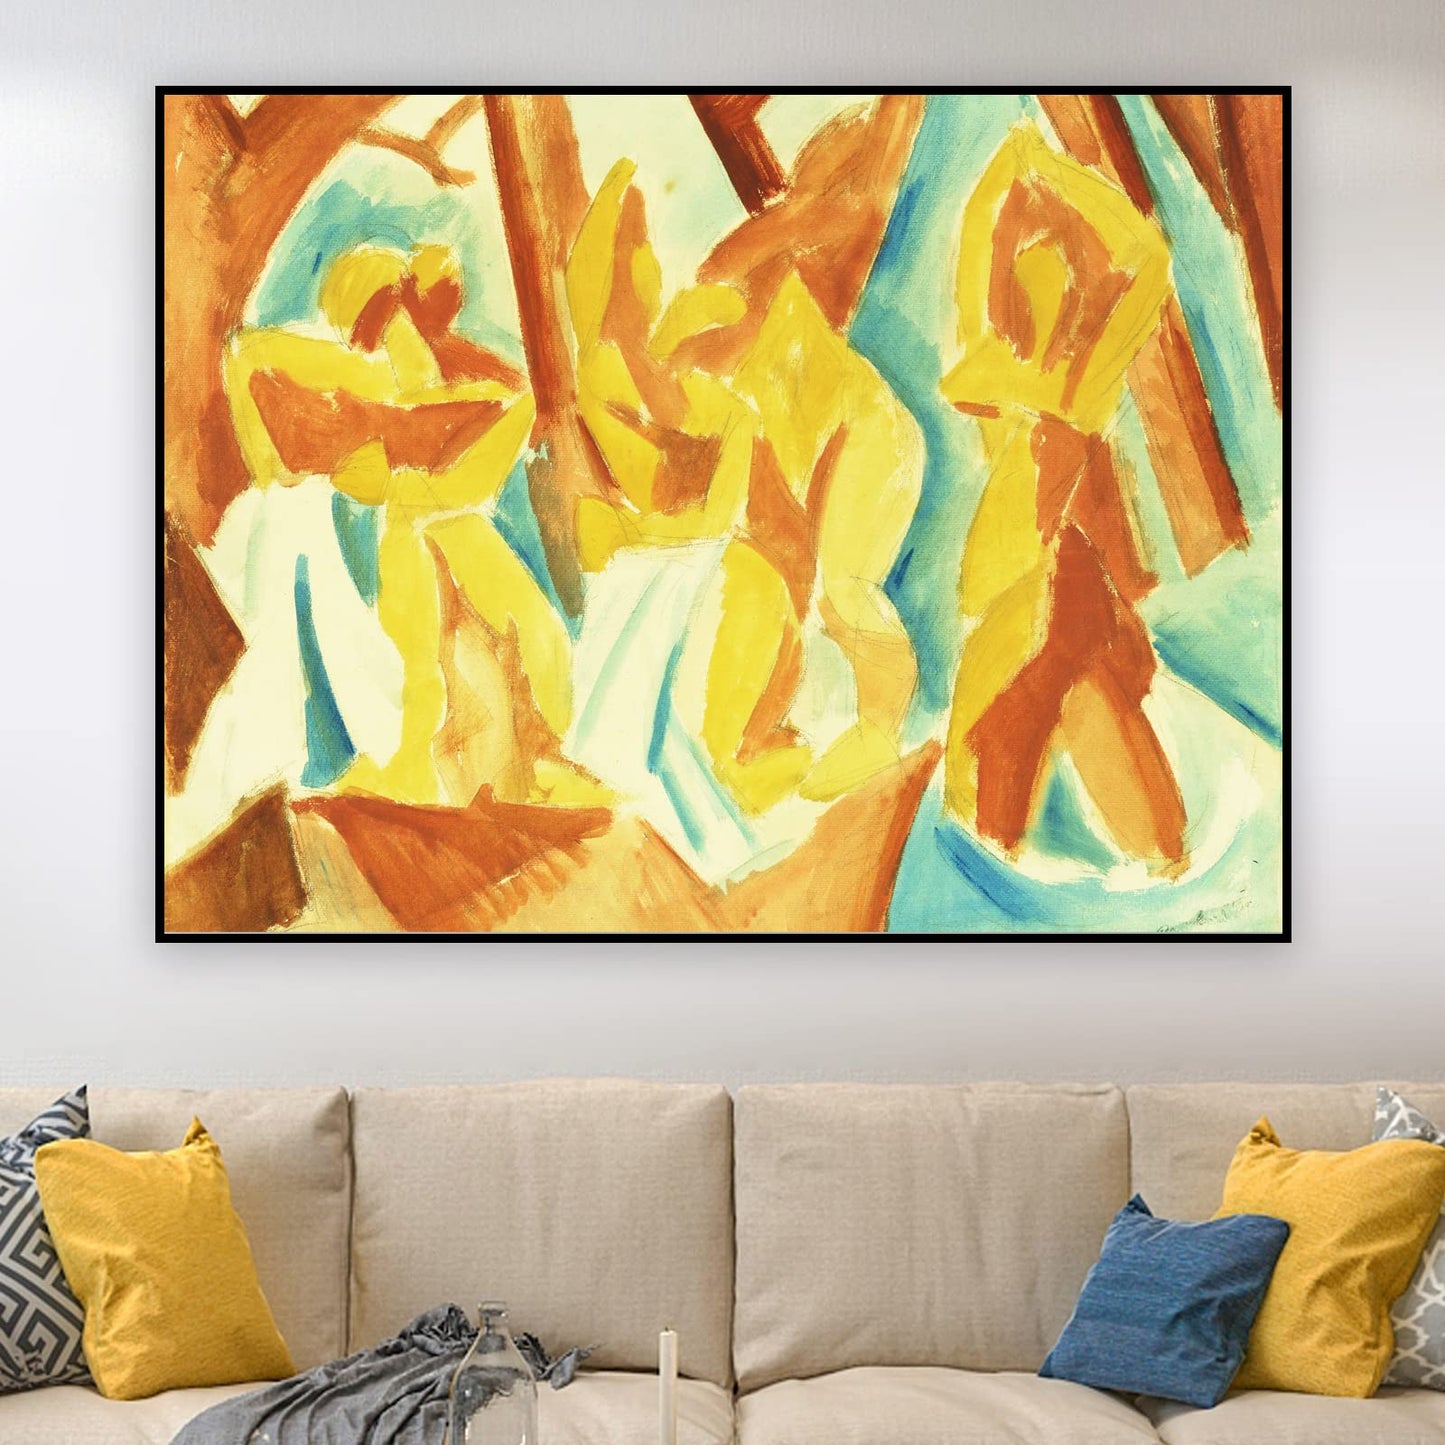 KWAY Picasso Wall Art Prints - Bathers in the forest Poster - Abstract Canvas Wall Art - Famous Painting Reproduction Unique Home Decor for Office Bedroom Unframed (12x16in/30x40cm)